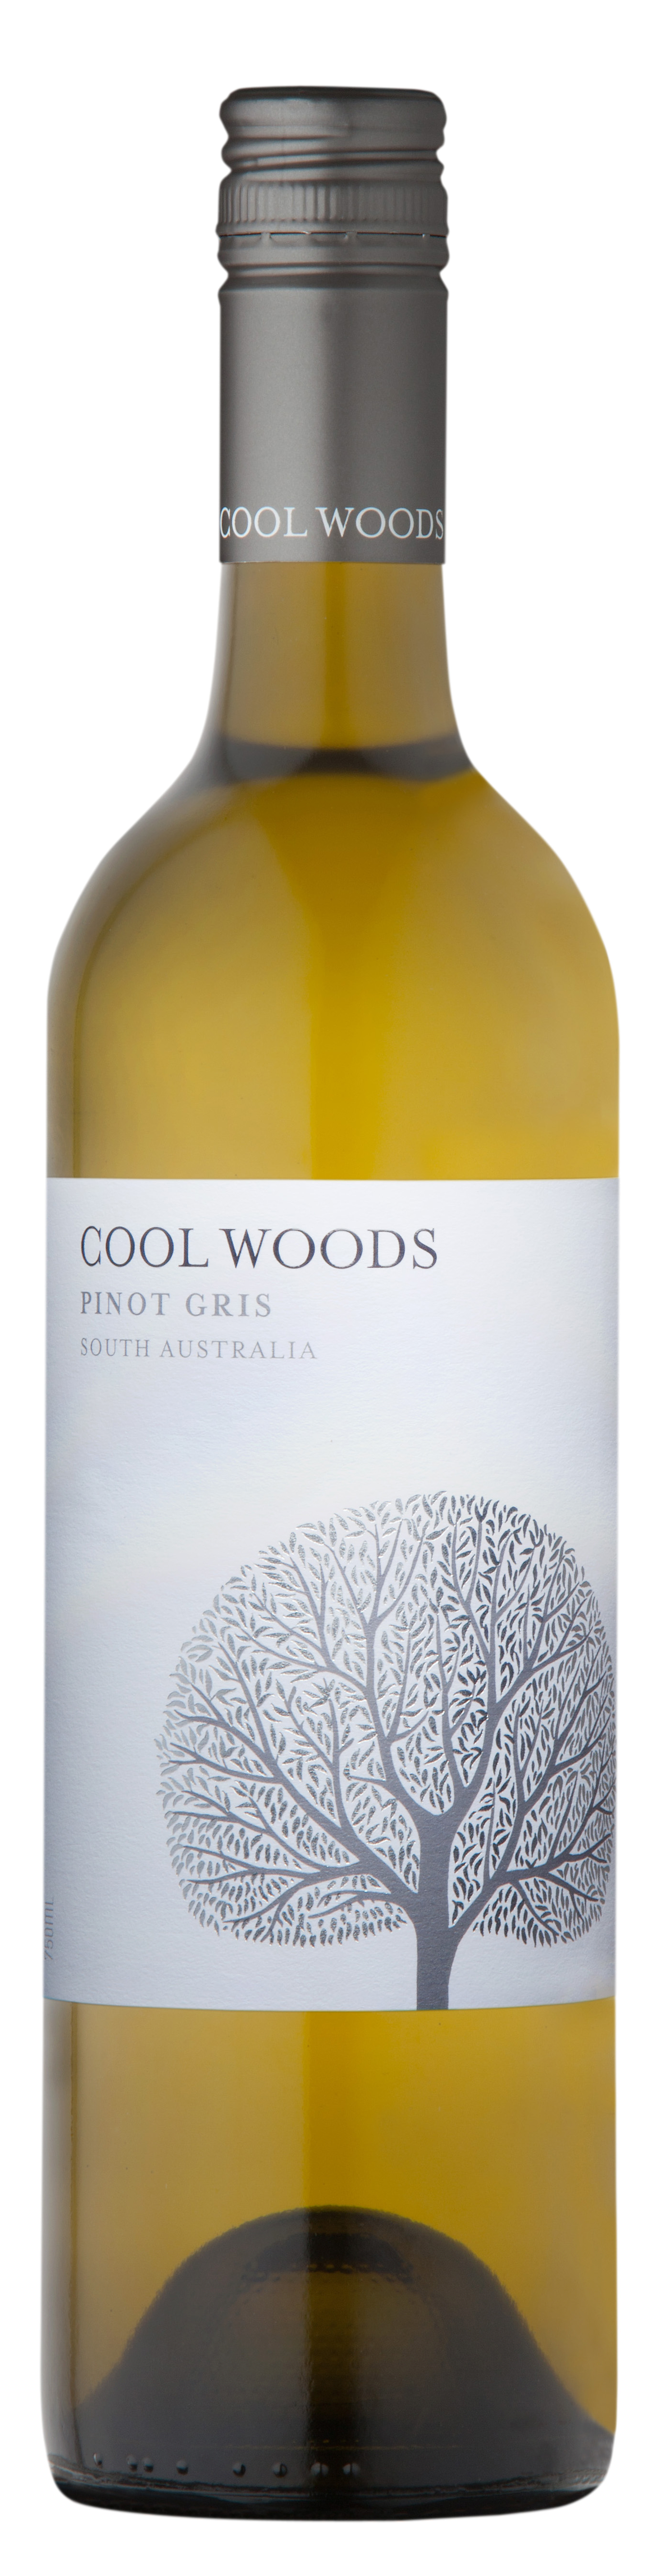 Cool Woods Pinot Gris